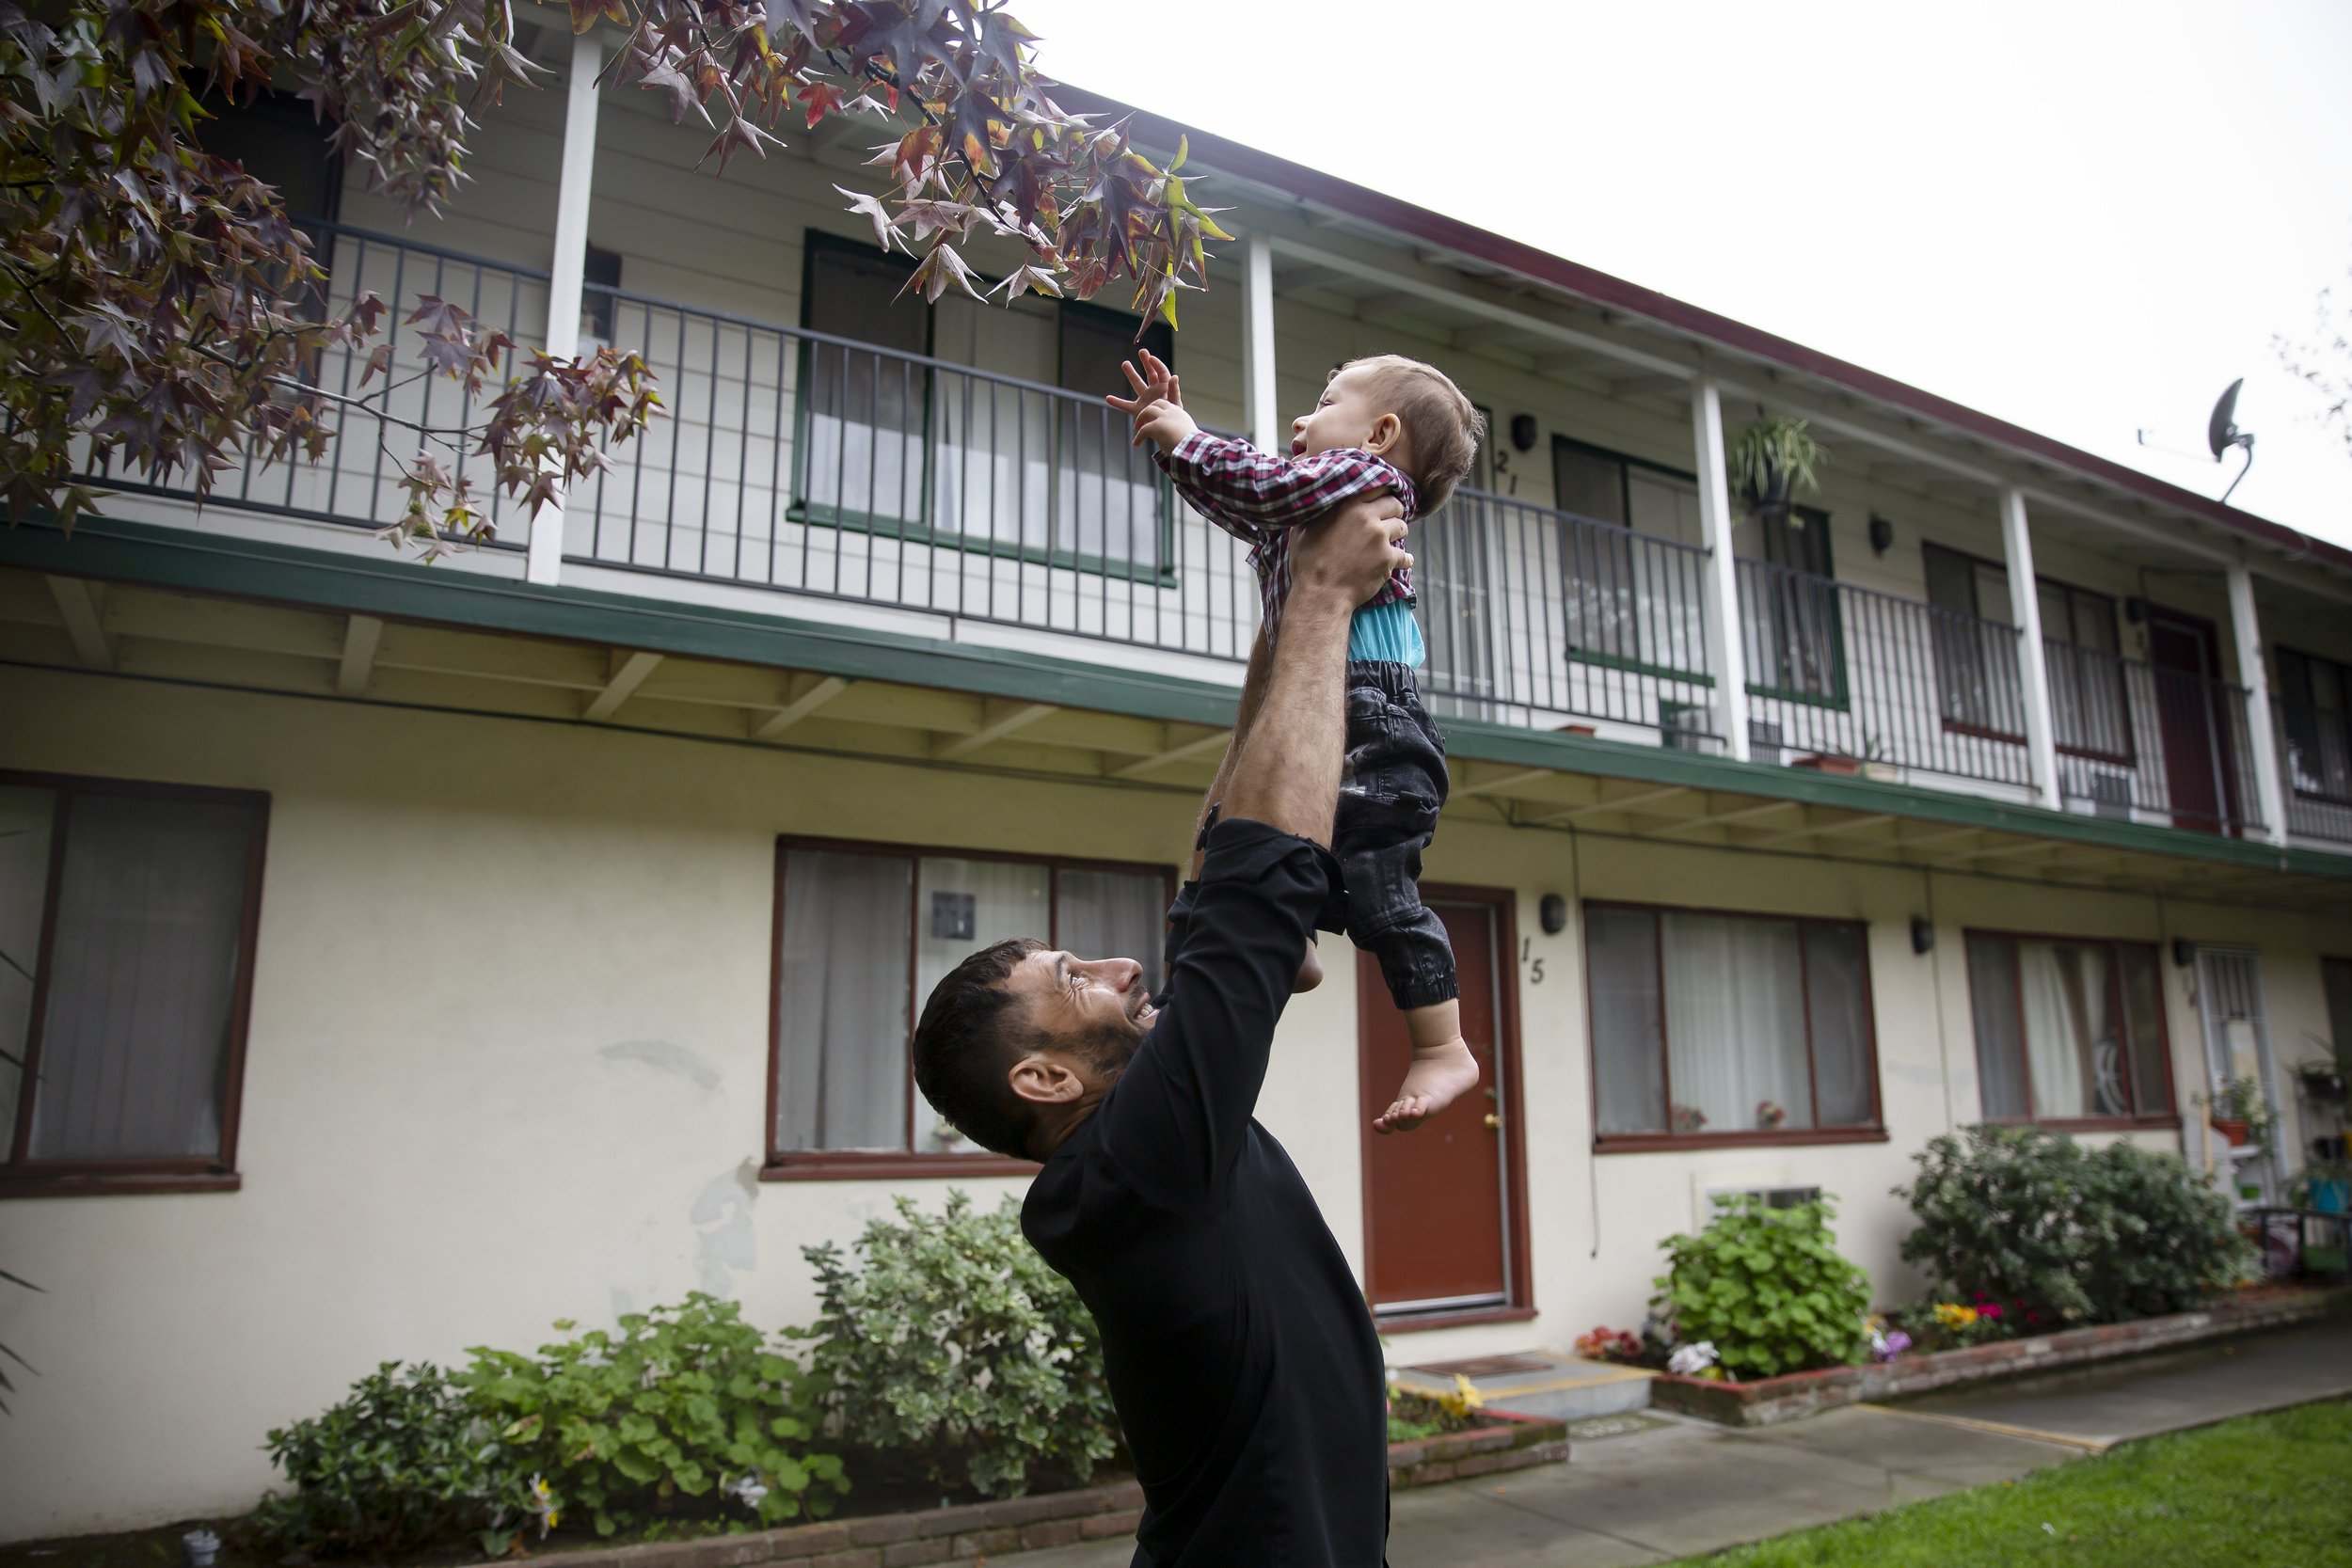  Najibullah Mohamamdi holds his one-year-old son Yasar up in the air  to play with tree leaves outside their one bedroom apartment in Sacramento, Calif. on Saturday, November 13, 2021. Najibullah Mohammadi, his wife Susan, their two young children Za